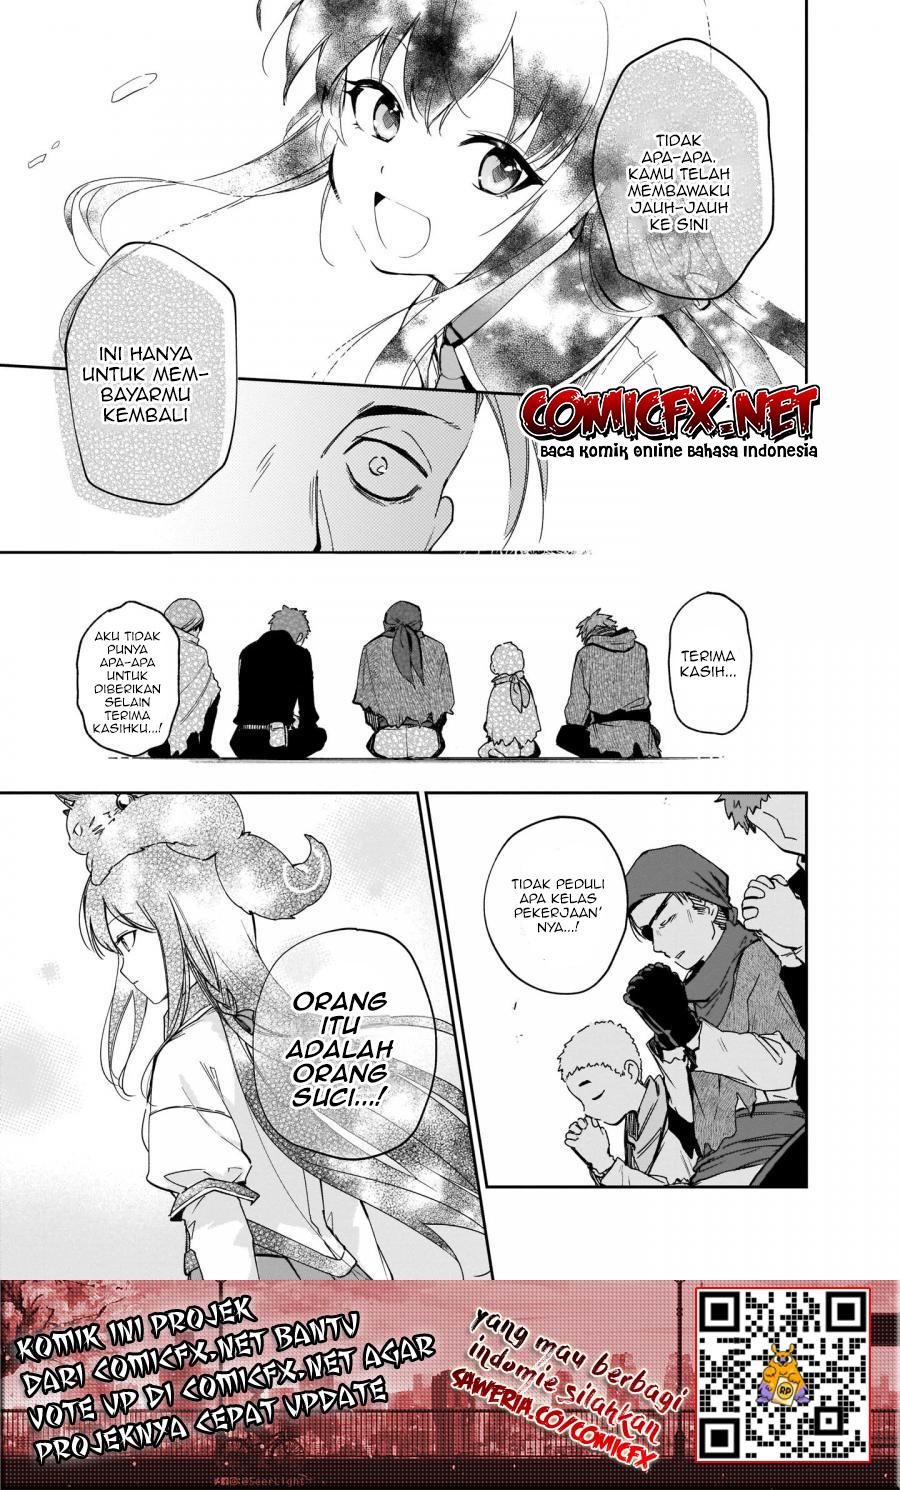 Saint? No, Just a Passing Monster Tamer! ~The Completely Unparalleled Saint Travels with Fluffies~ Chapter 04.1